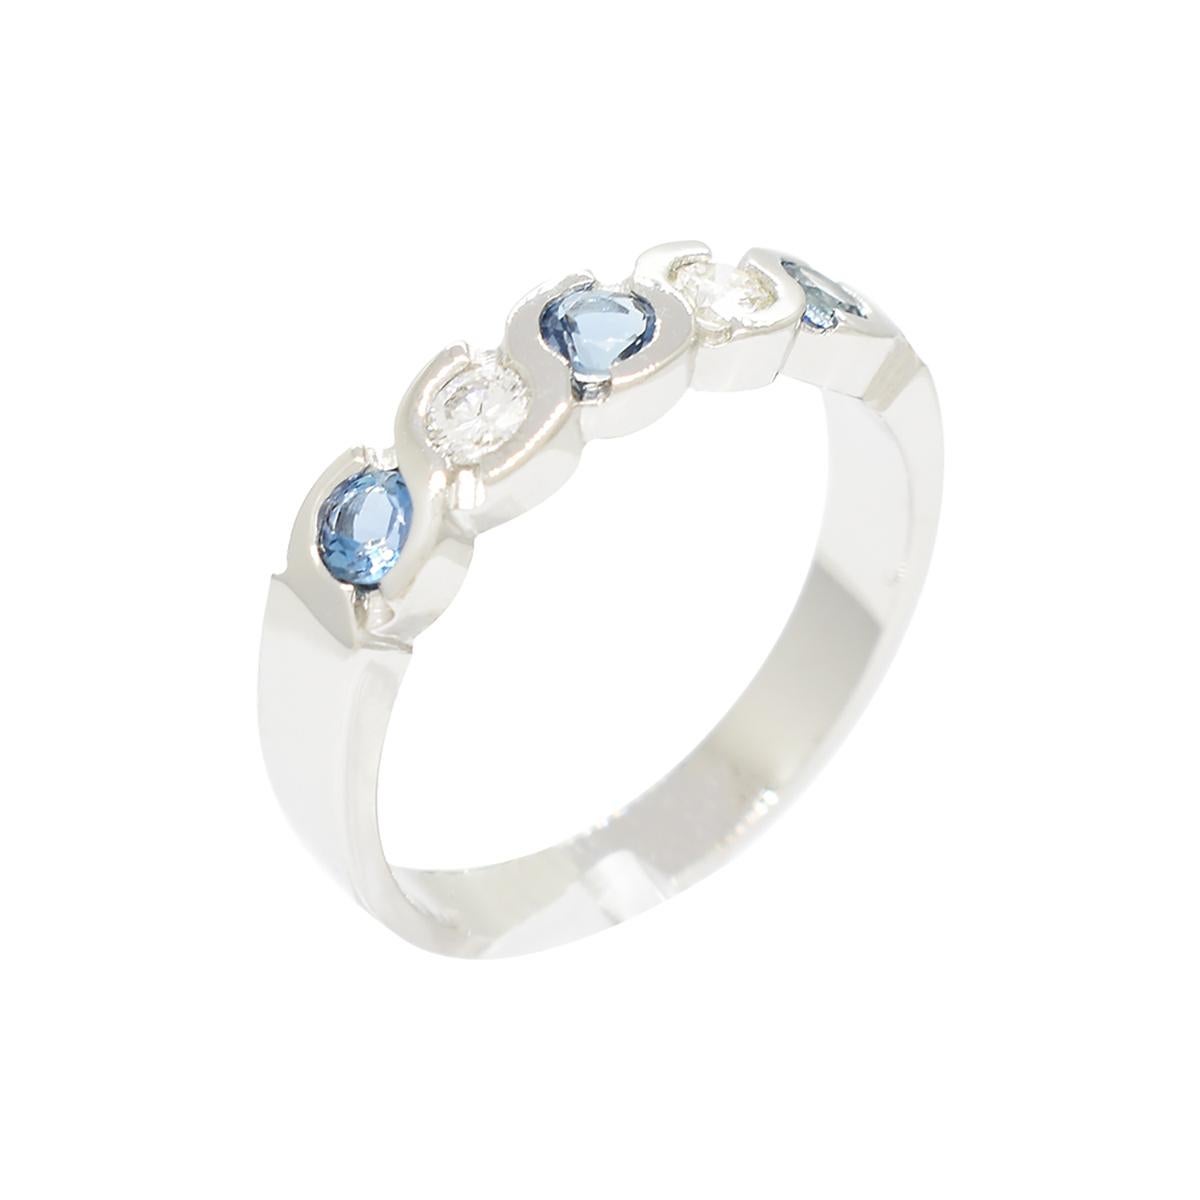 Wonderful aquamarine and diamond ring band with a stunning selection of 3 natural aquamarines and 2 genuine diamonds, all beautifully set in a solid 18K white gold ring design. The stunning blue color of the round cut aquamarines and gorgeous